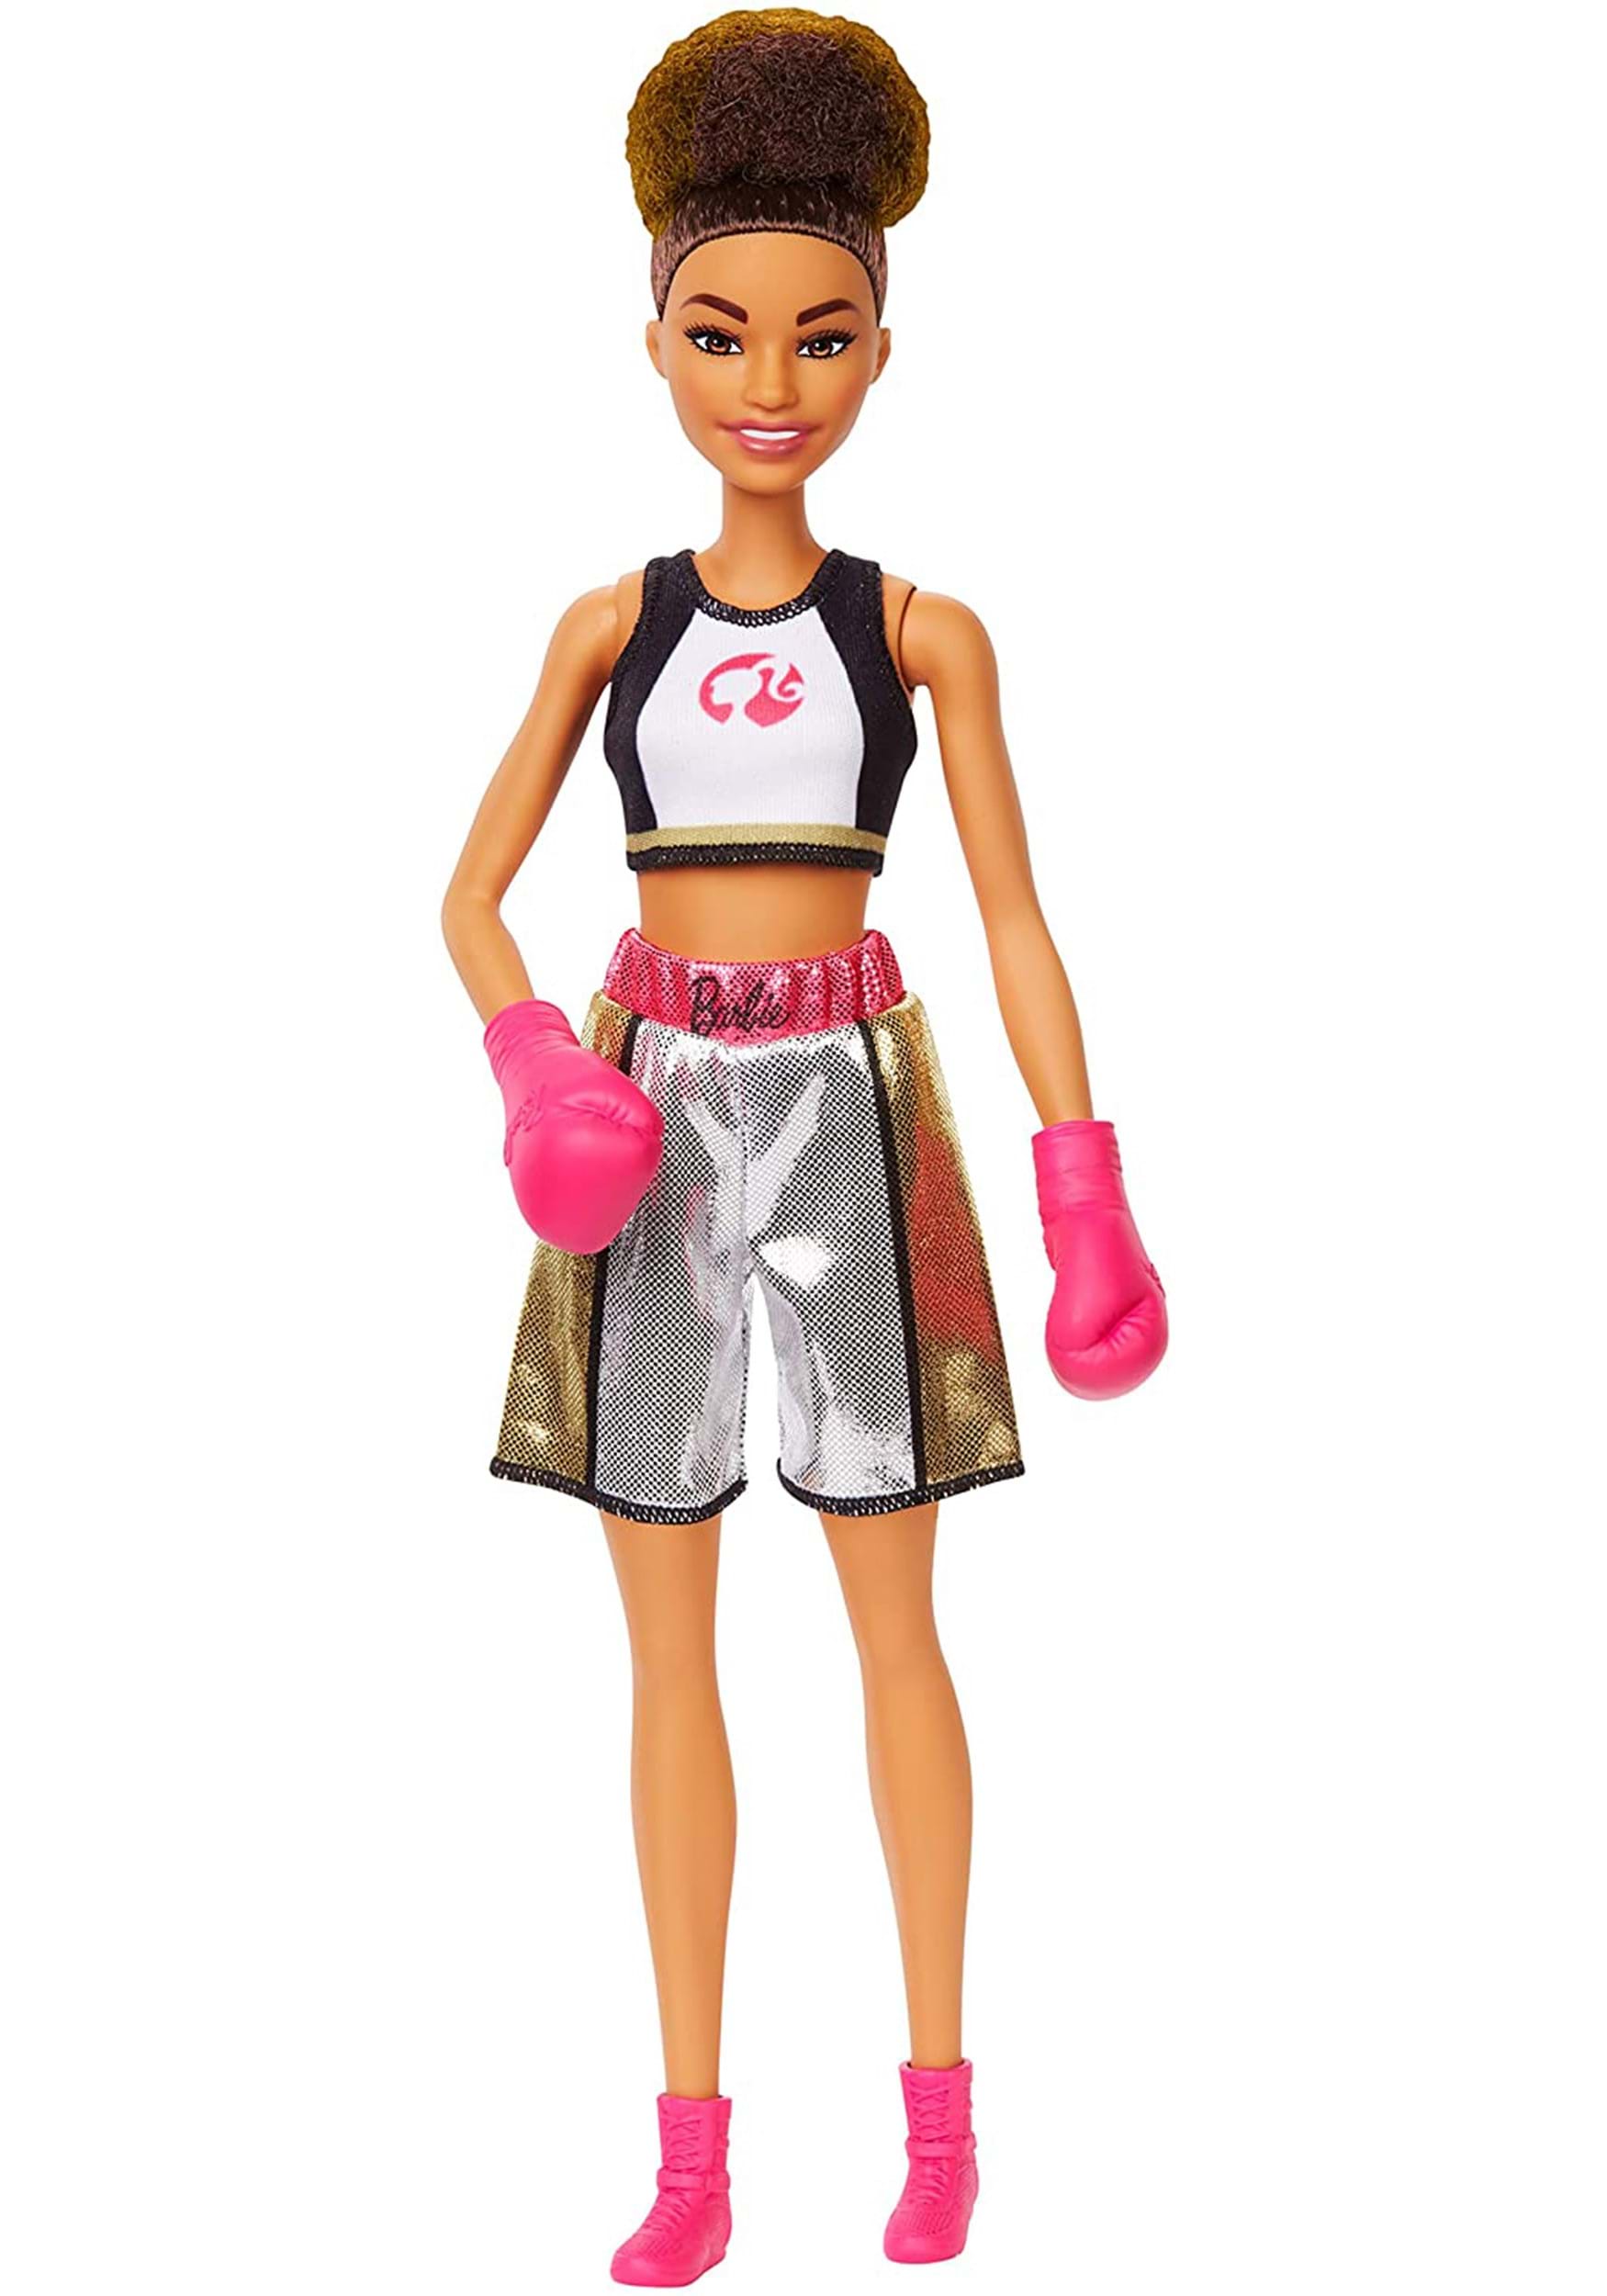 I Can Be Barbie Doll Boxer.